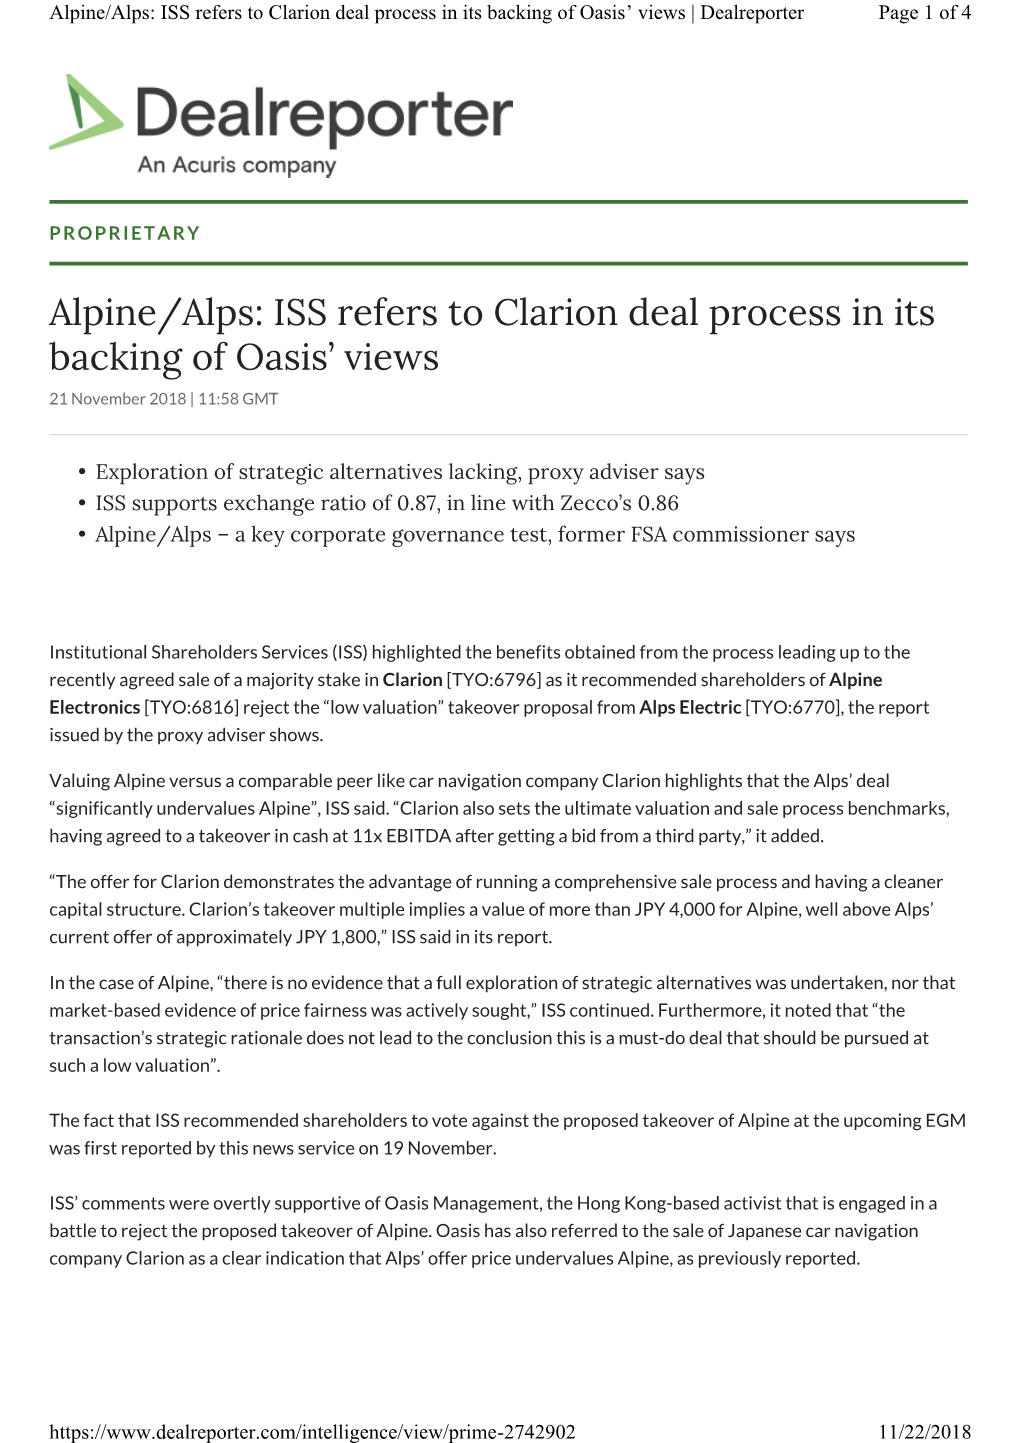 Alpine/Alps: ISS Refers to Clarion Deal Process in Its Backing of Oasis' Views